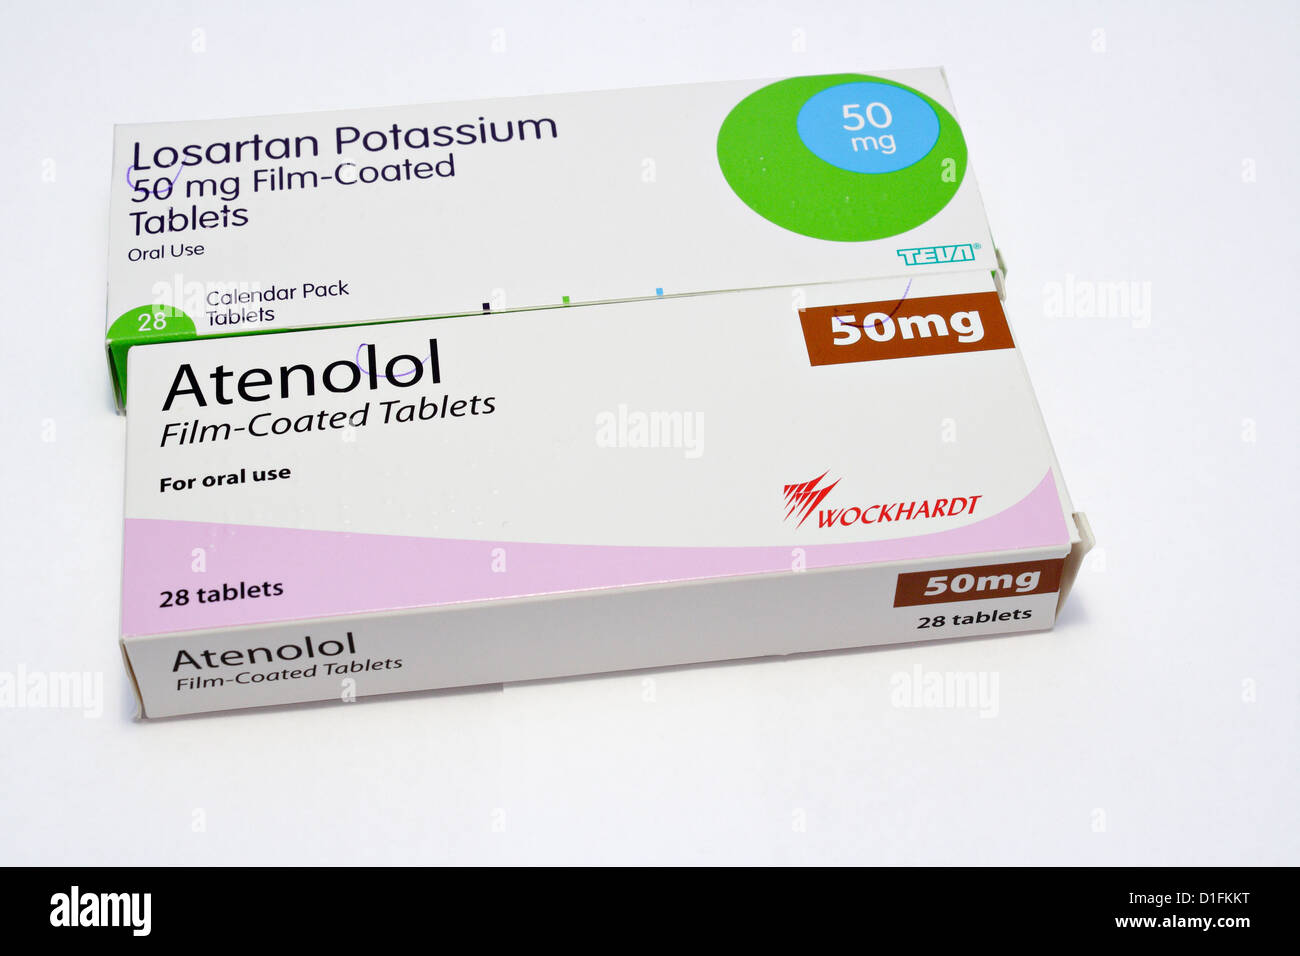 Photograph of Atenolol a beta blocker and Losartan Potassium tablets a drug to treat high blood pressure both are prescribed in the UK, Stock Photo